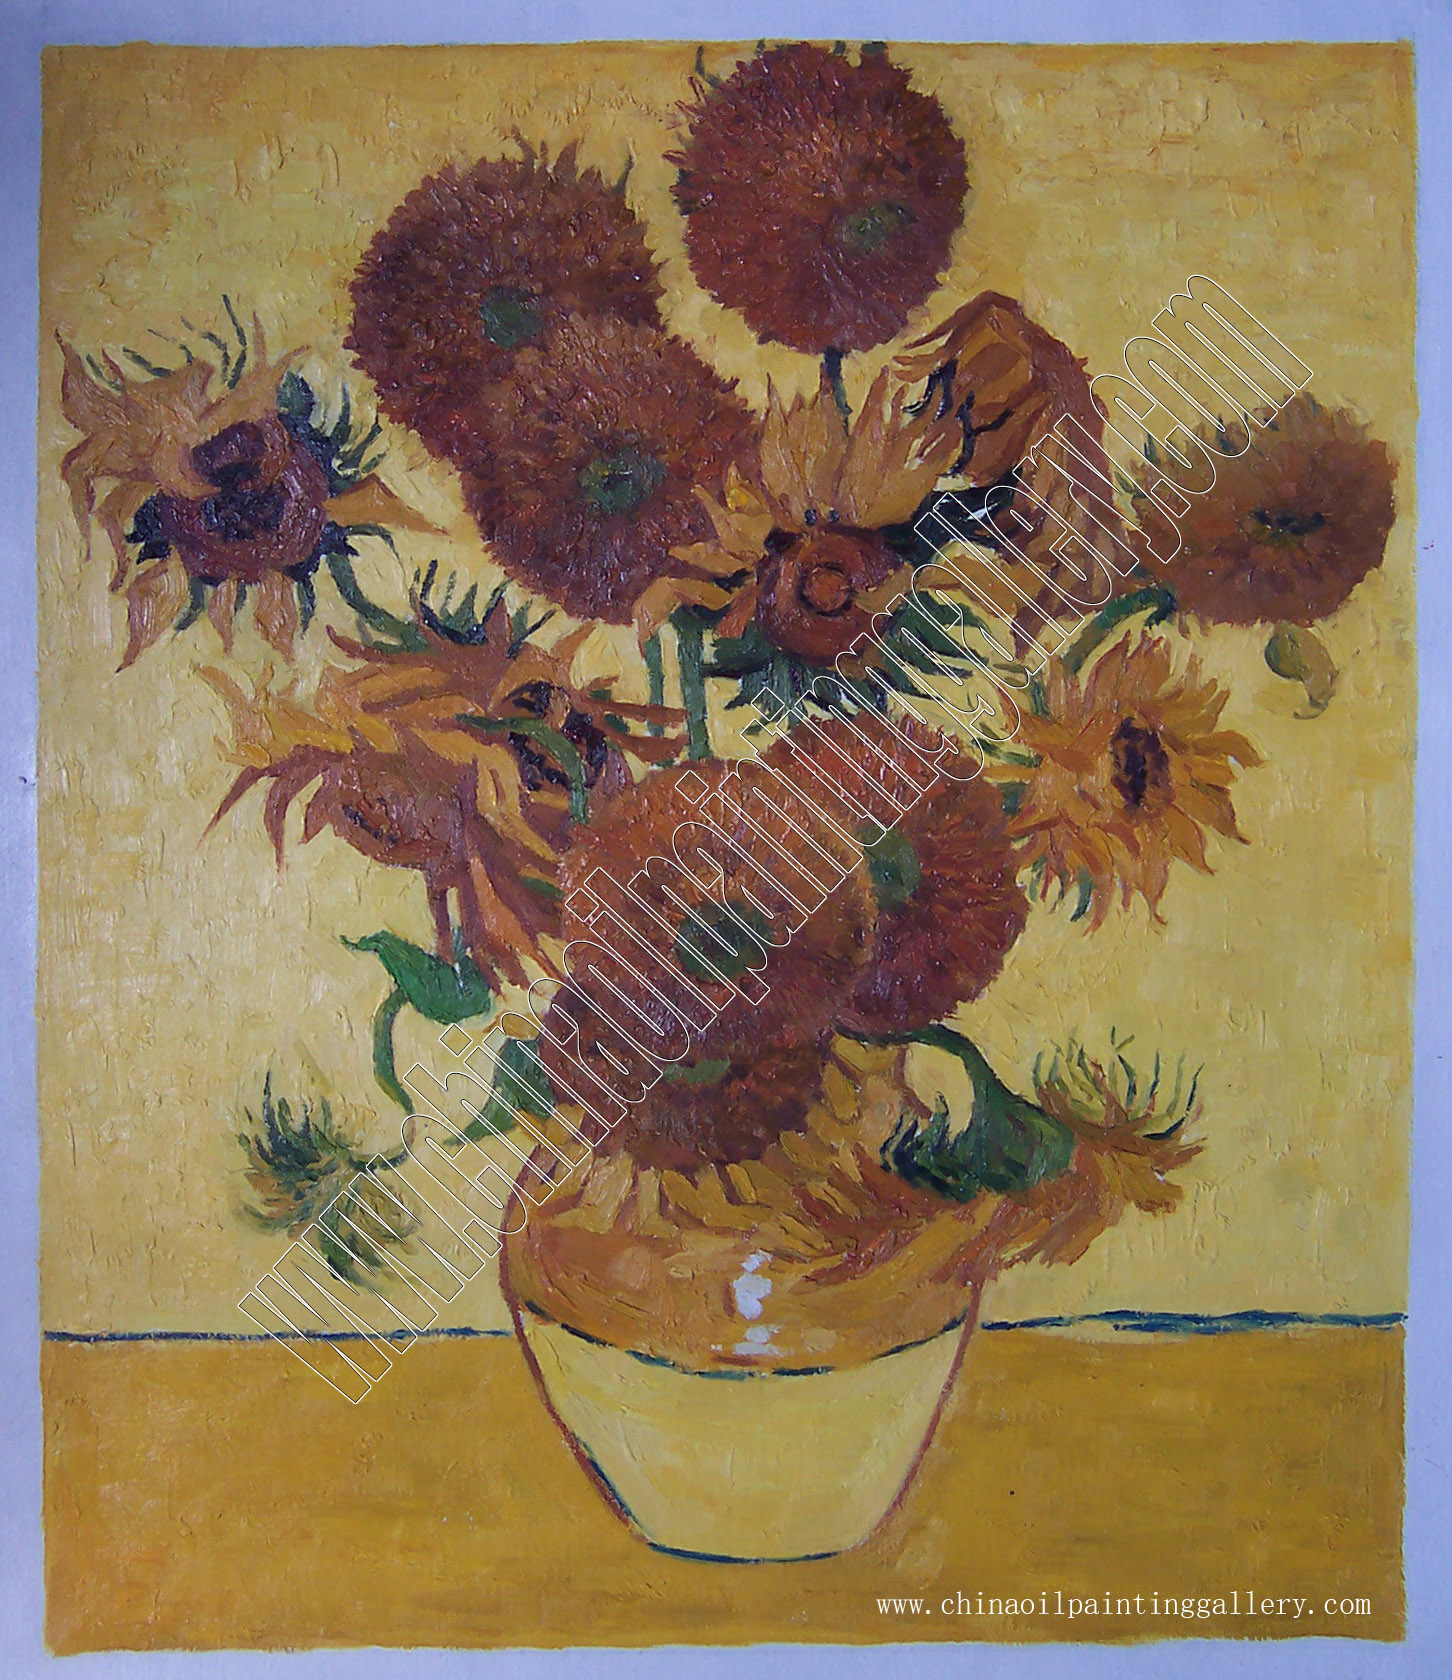 Vincent van Gogh Sunflowers - Oil painting reproductions 5